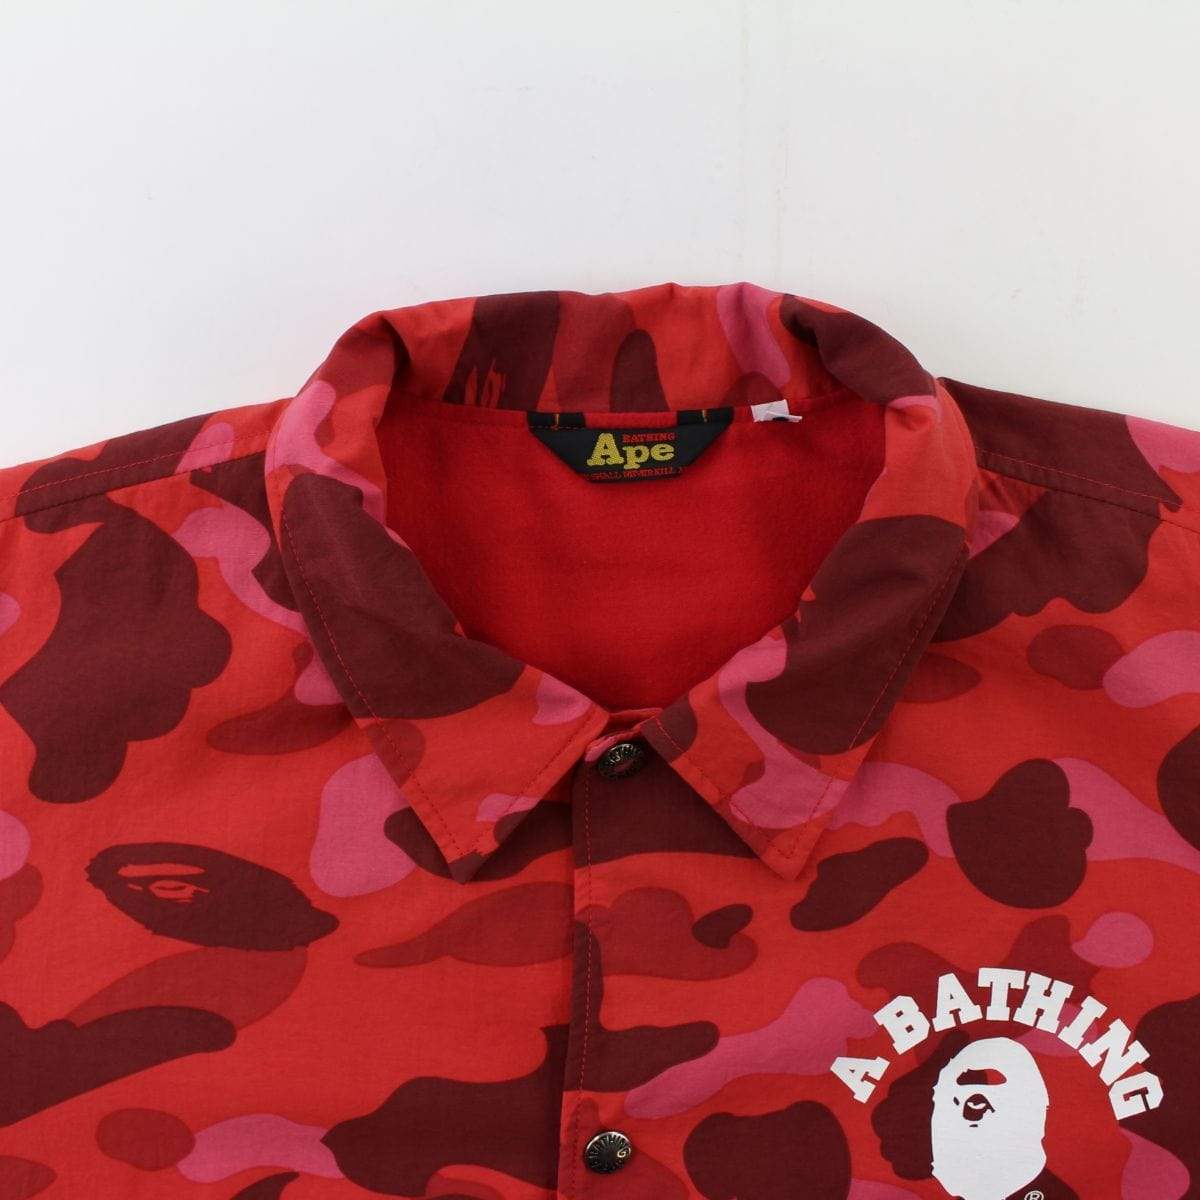 Bape Red Camo College Coach Jacket - SaruGeneral